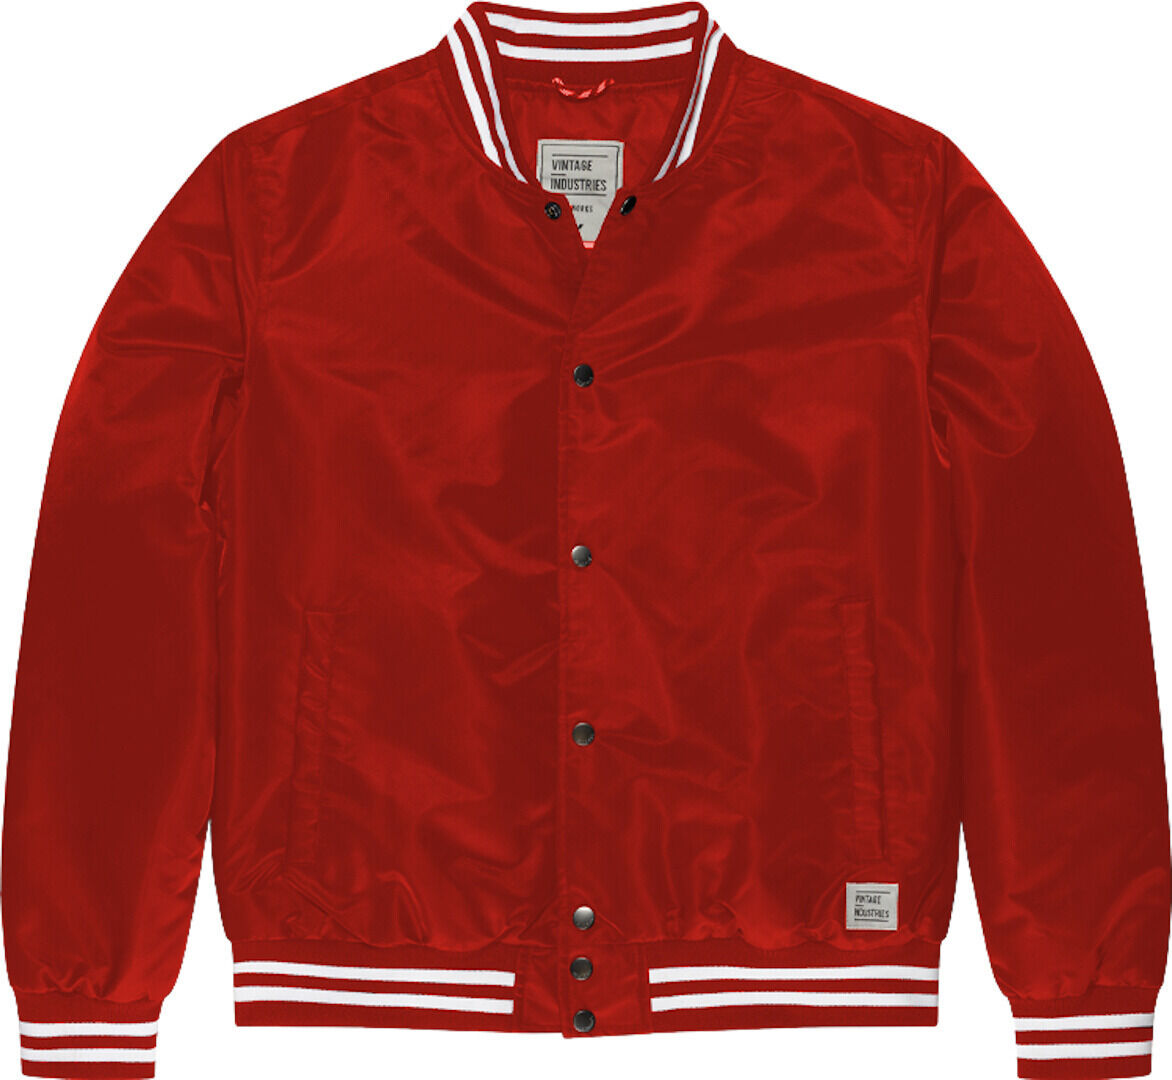 Vintage Industries Chapman Giacca Rosso L